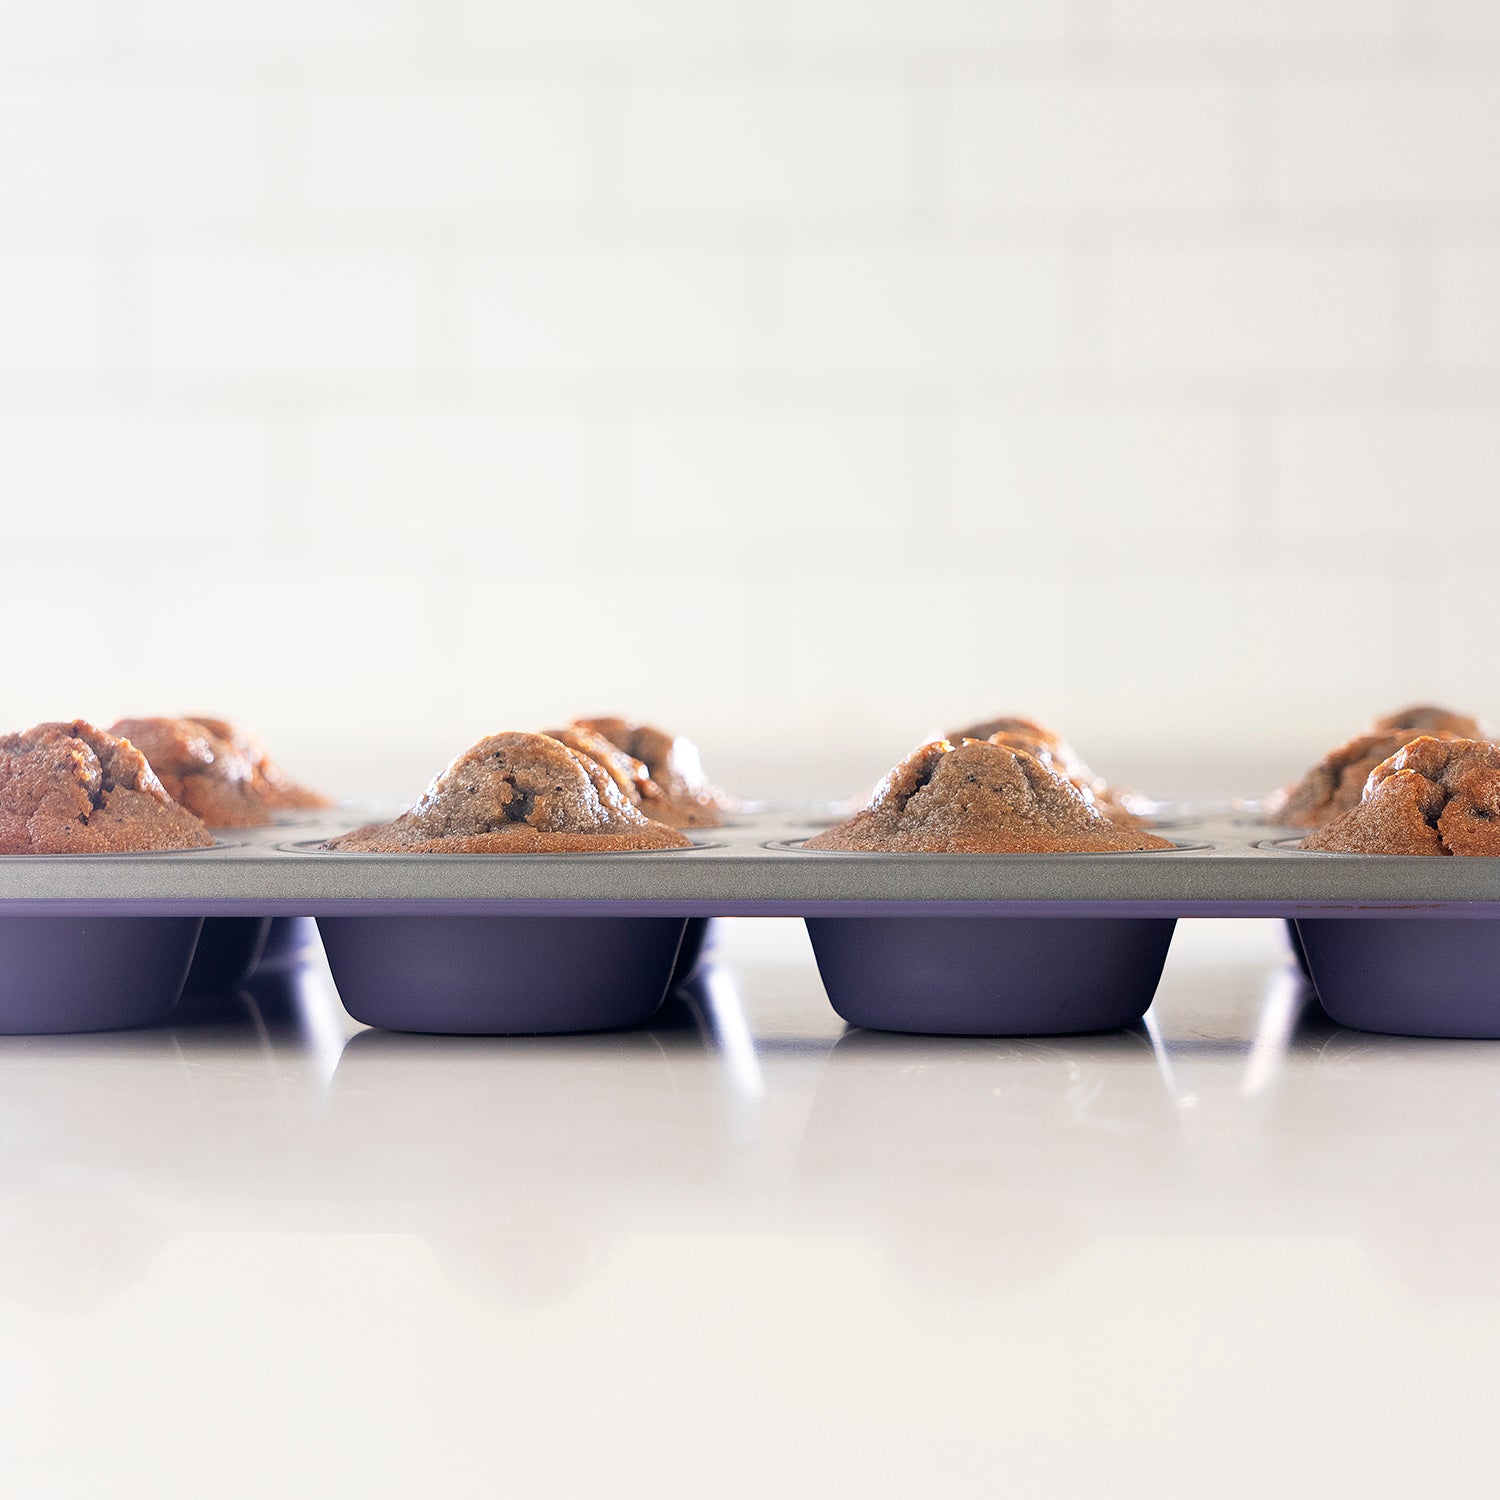 Gobel Muffin Tray for 12 Muffins - Interismo Online Shop Global